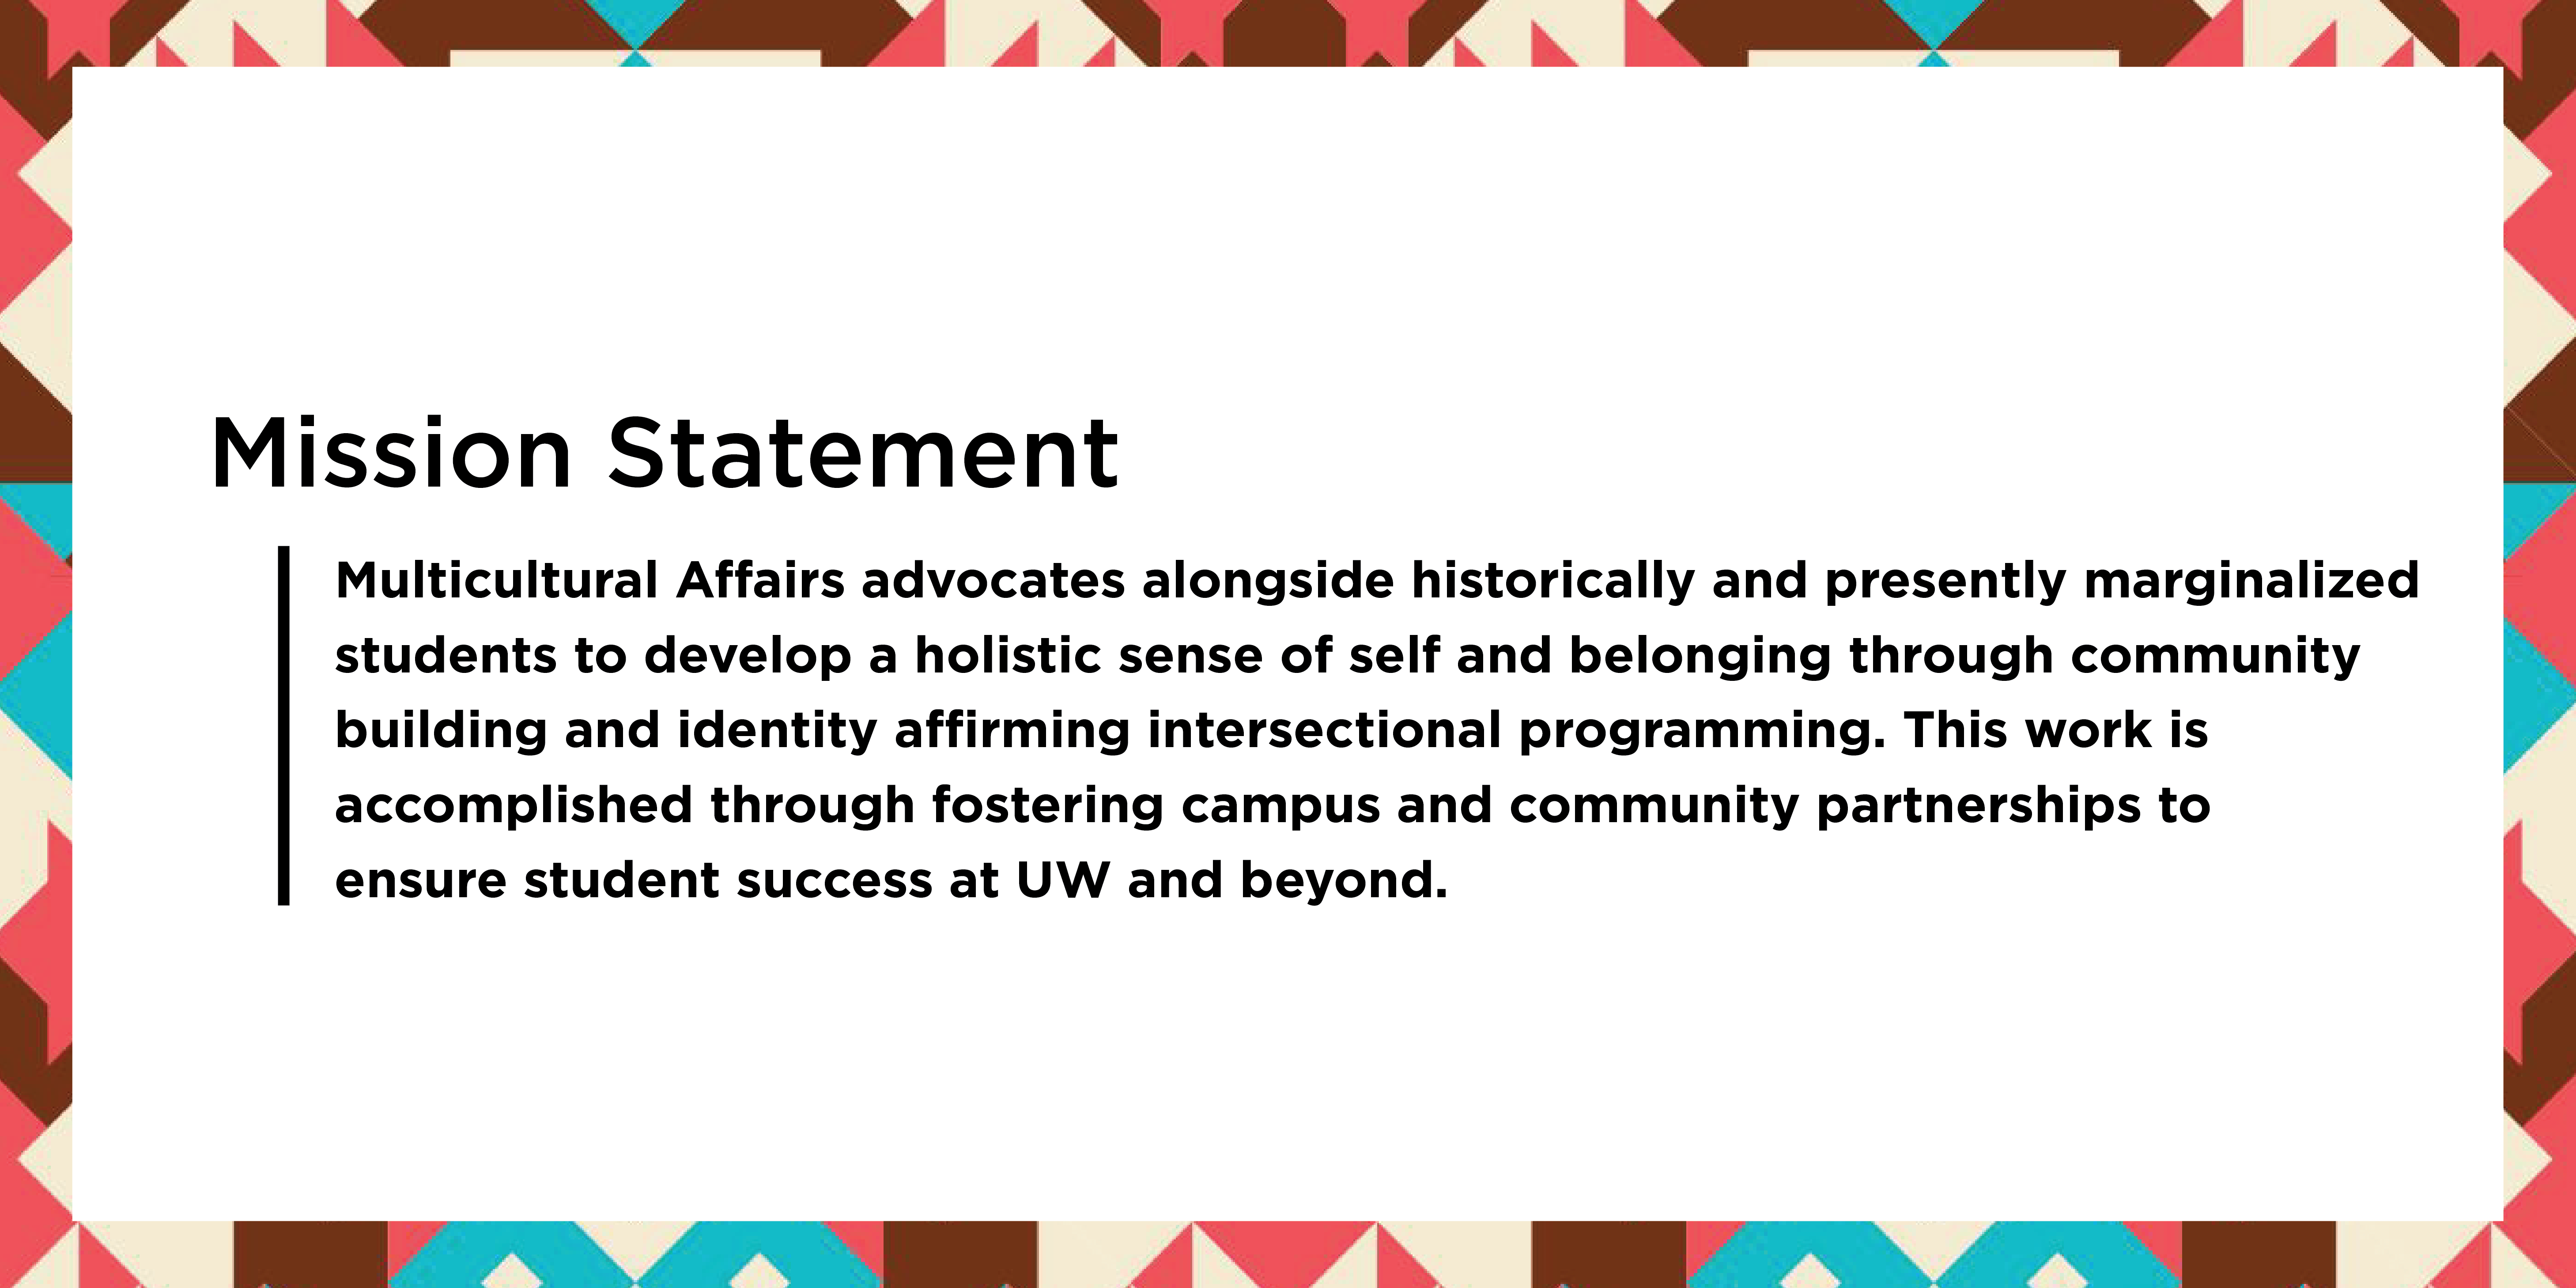 Mission Statement: Multicultural Affairs advocates alongside historically and presently marginalized  students to develop a holistic sense of self and belonging through community  building and identity affirming intersectional programming. This work is  accomplished through fostering campus and community partnerships to  ensure student success at UW and beyond.